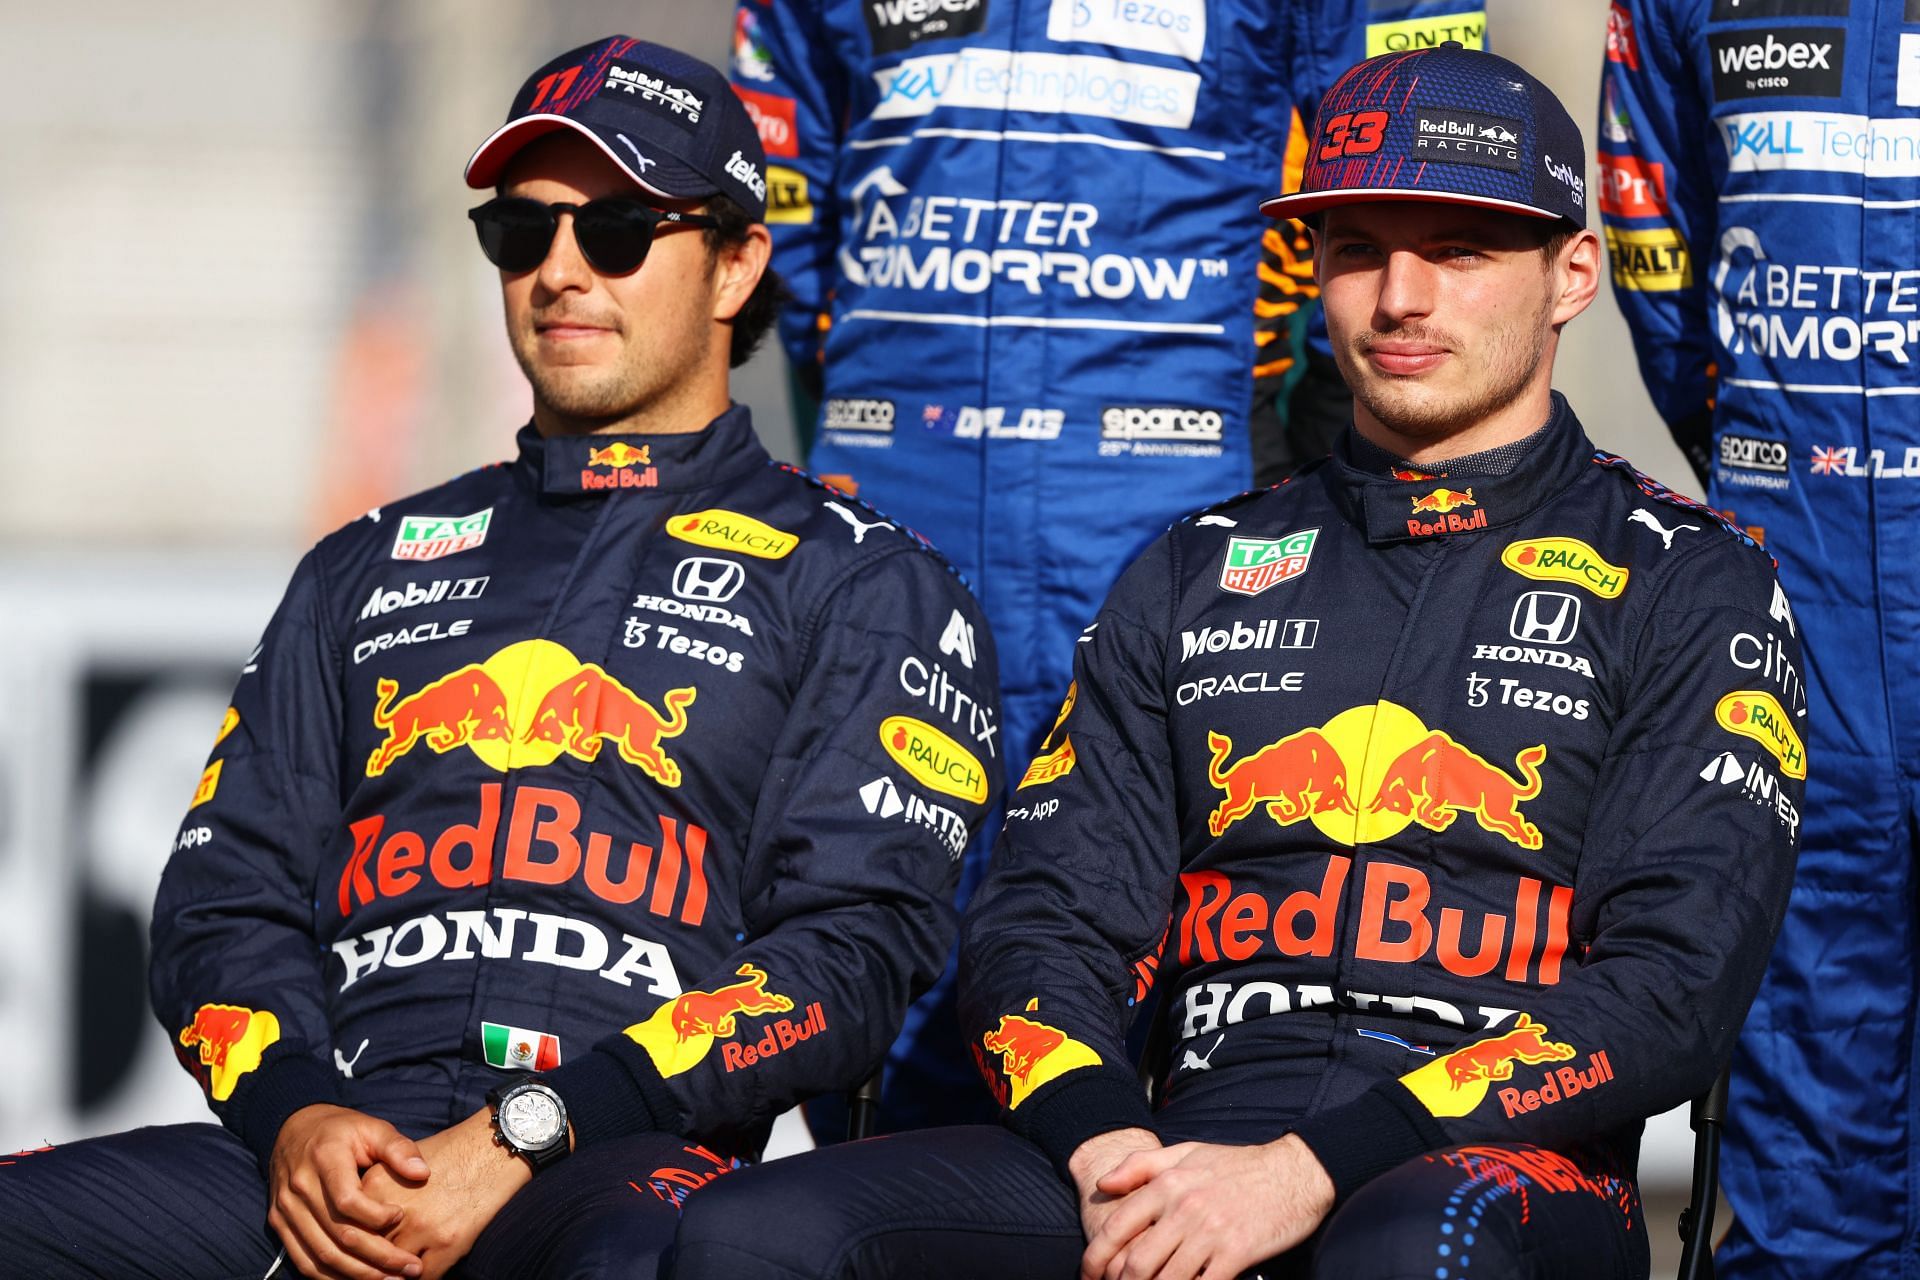 Sergio Perez (left) and Max Verstappen (right) (Photo by Bryn Lennon/Getty Images)